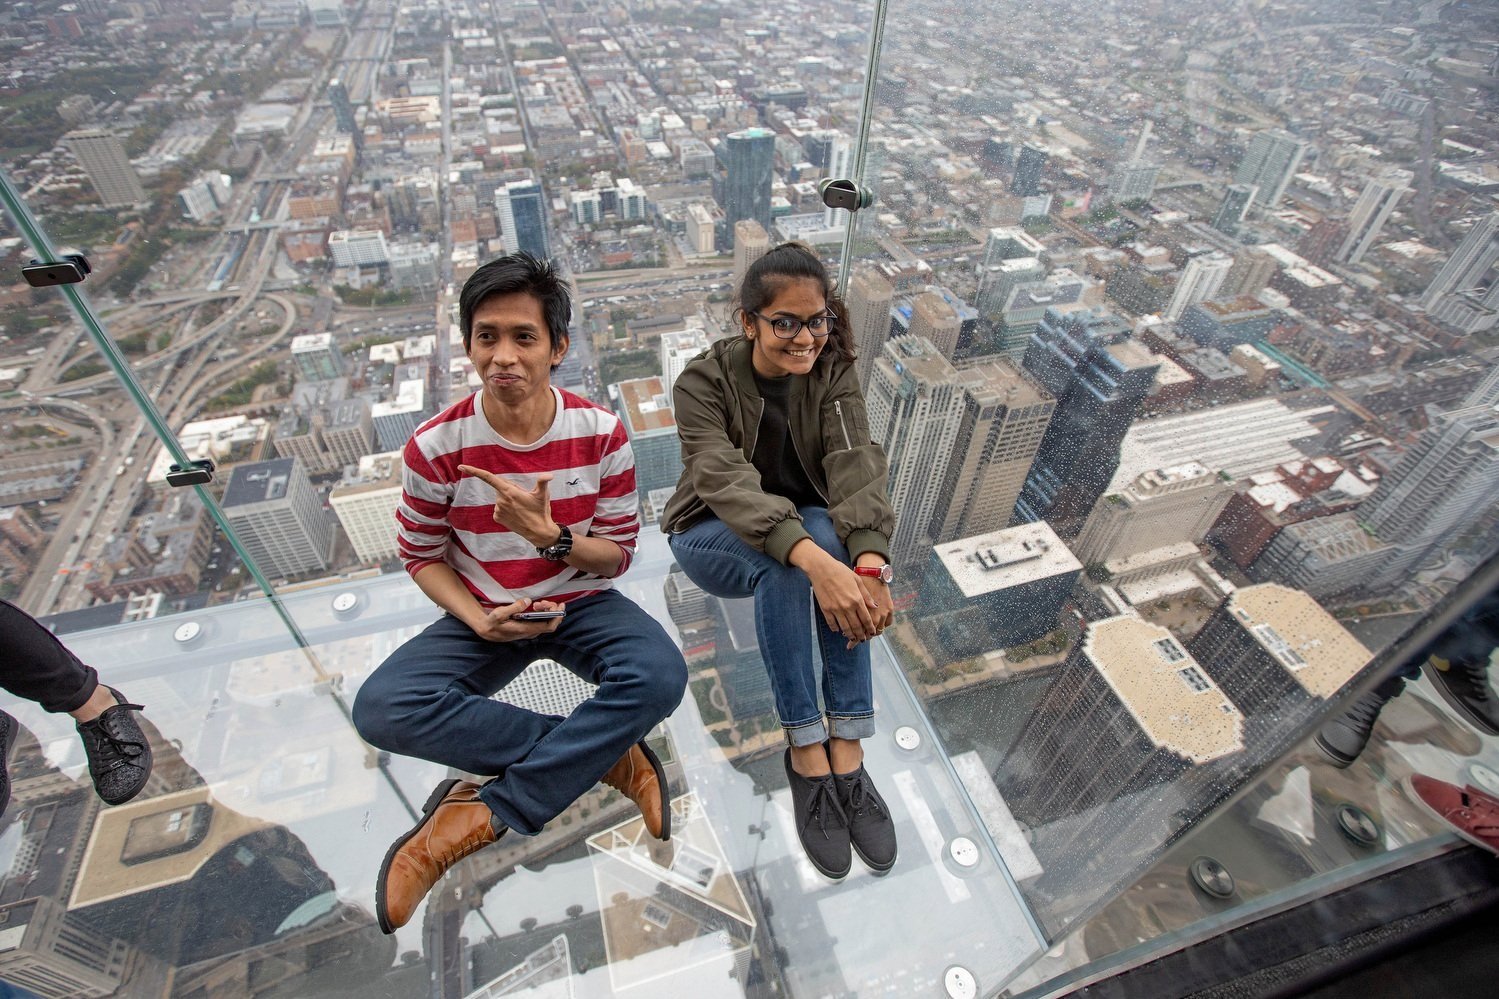 The glass floor at the Willis Tower observation deck